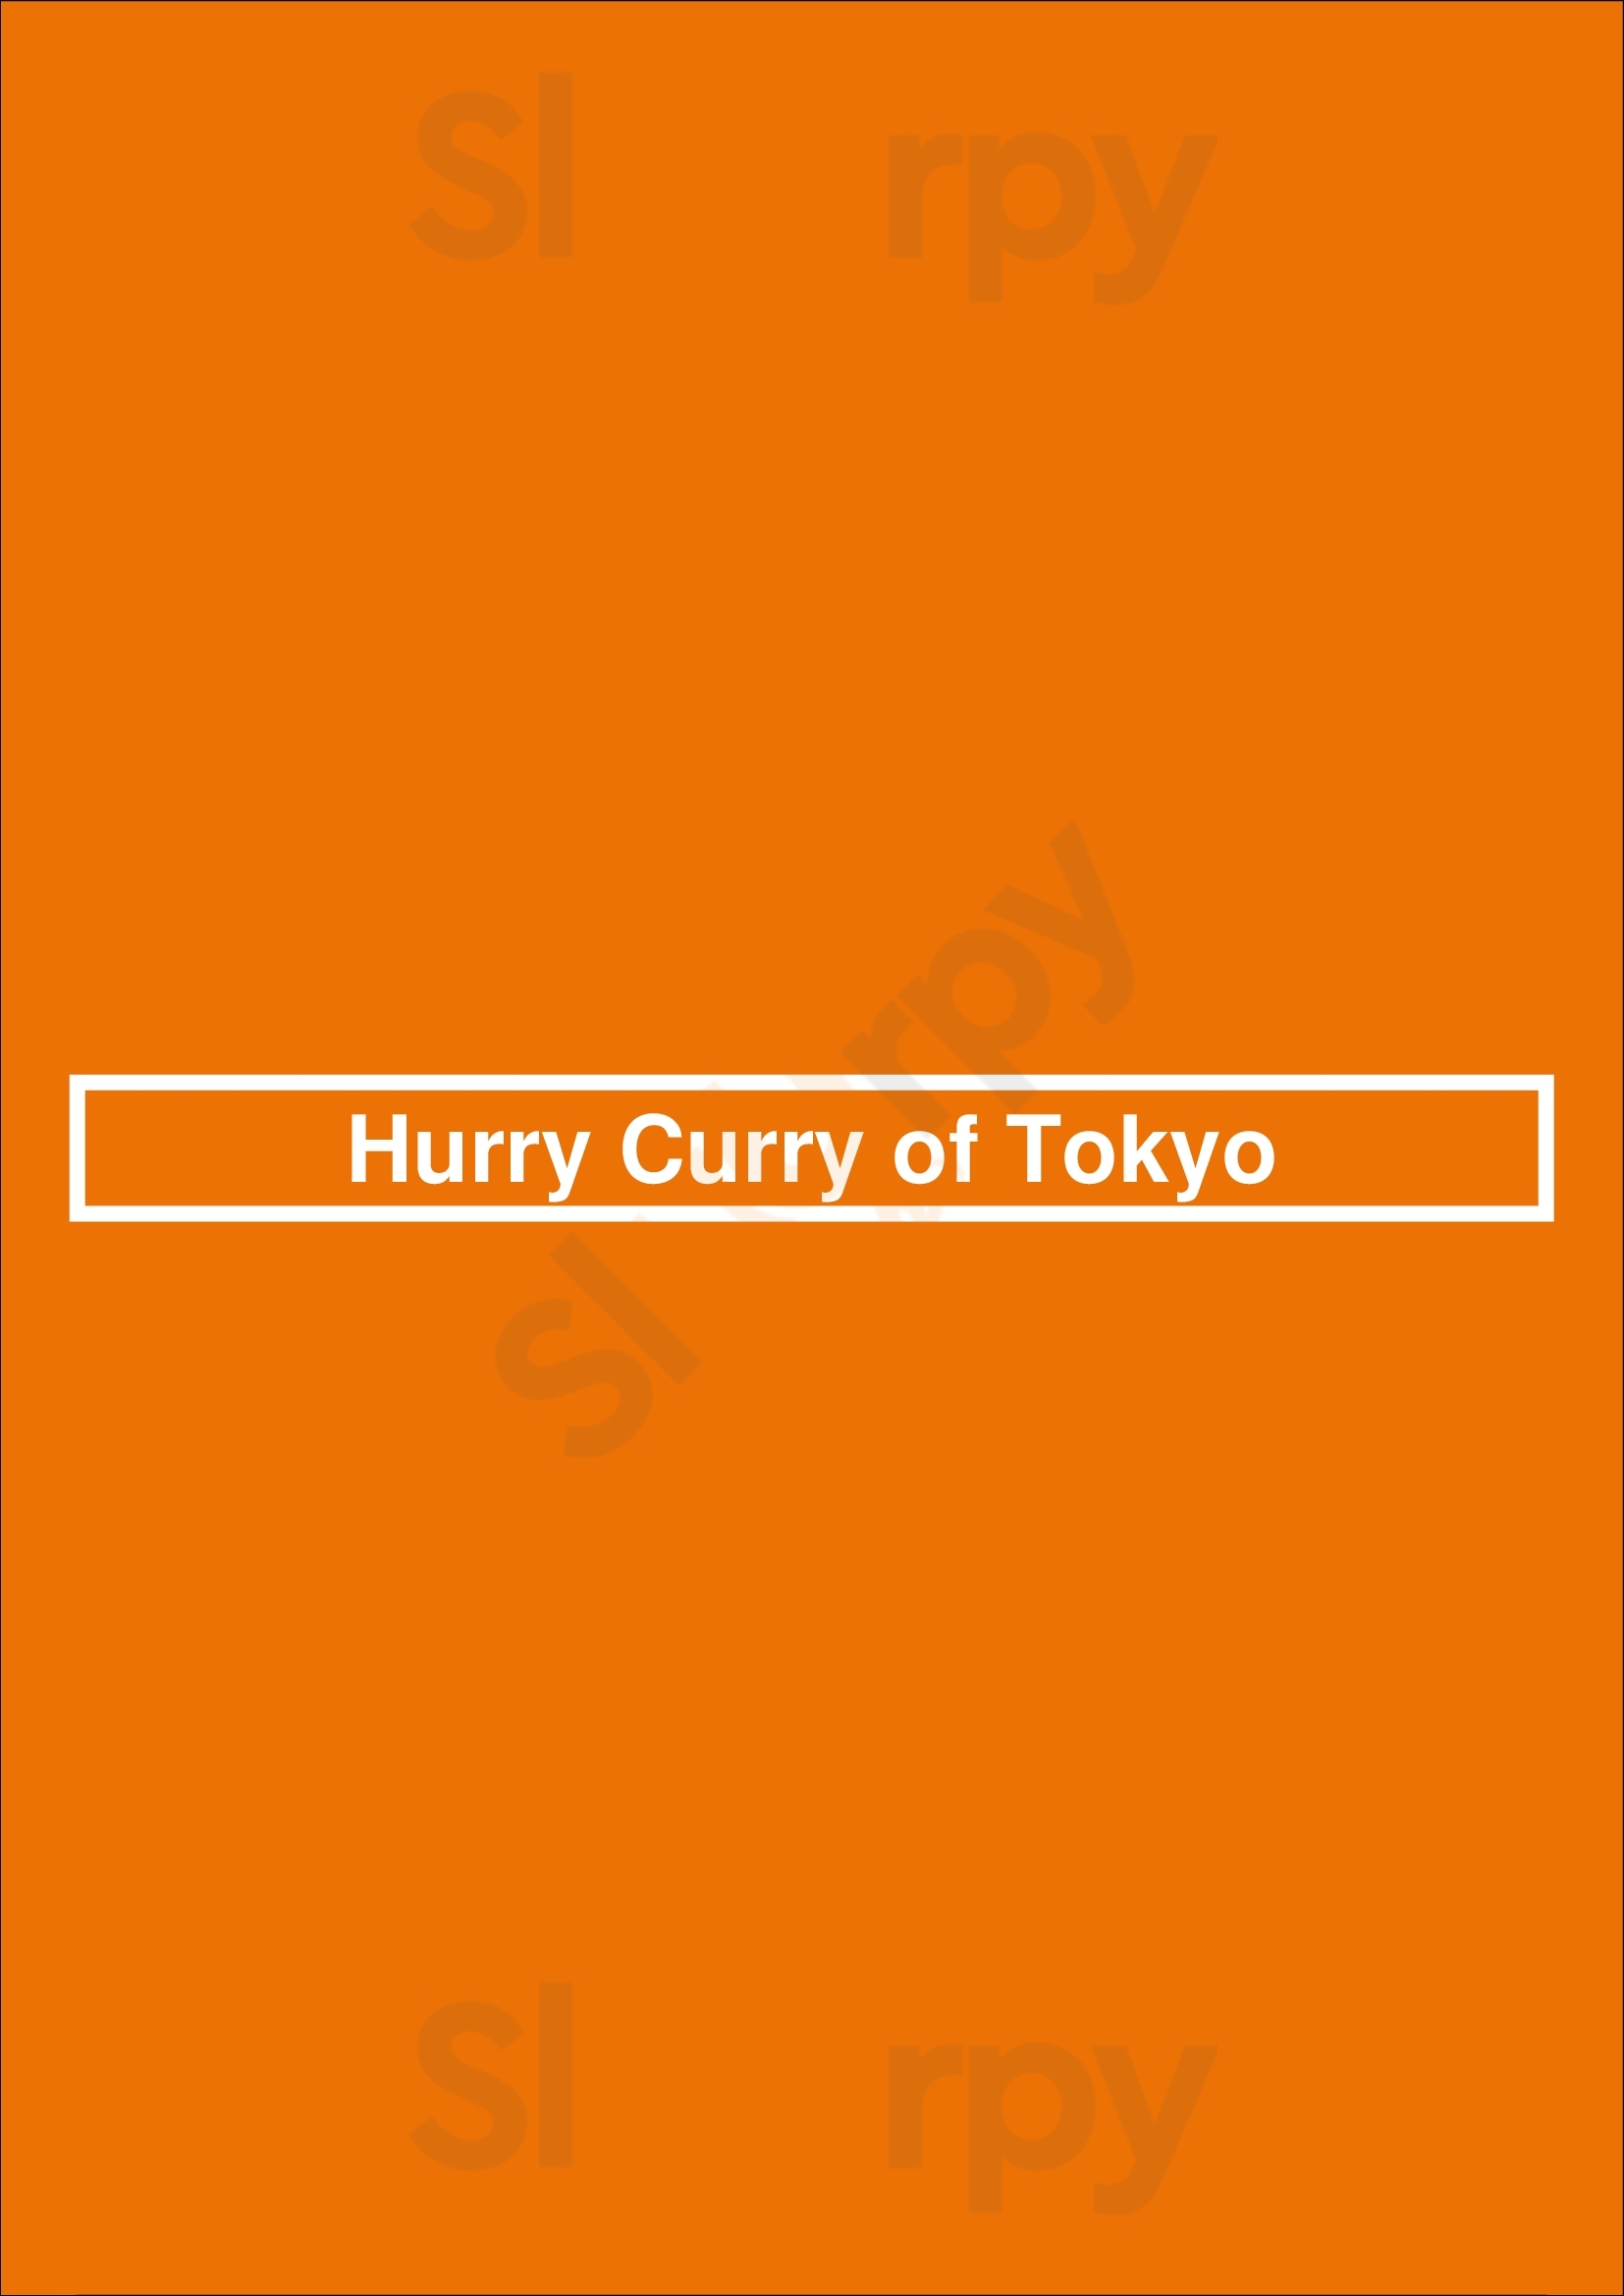 Hurry Curry Of Tokyo Los Angeles Menu - 1